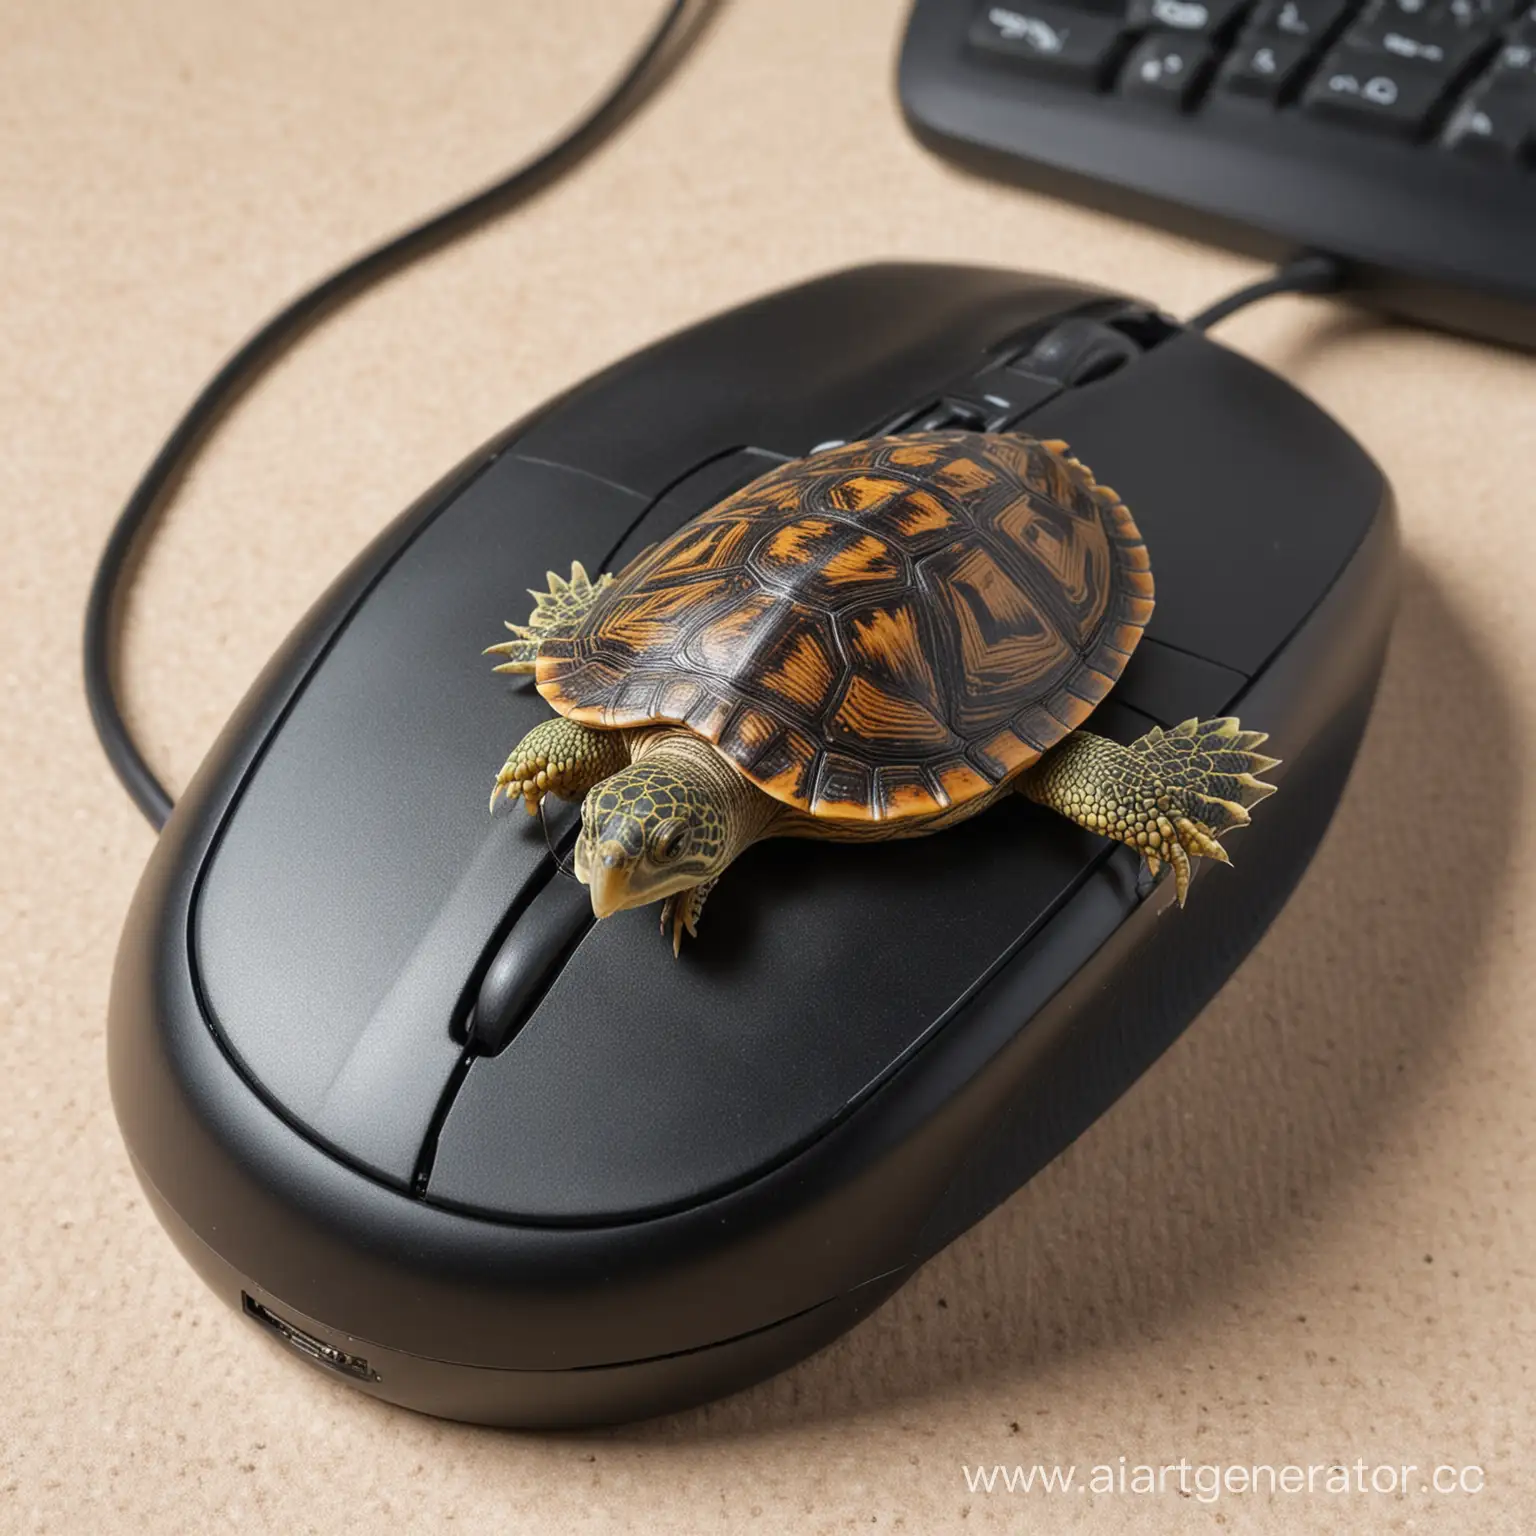 Turtle-Perched-on-Computer-Mouse-Playful-Reptile-Engages-with-Technology